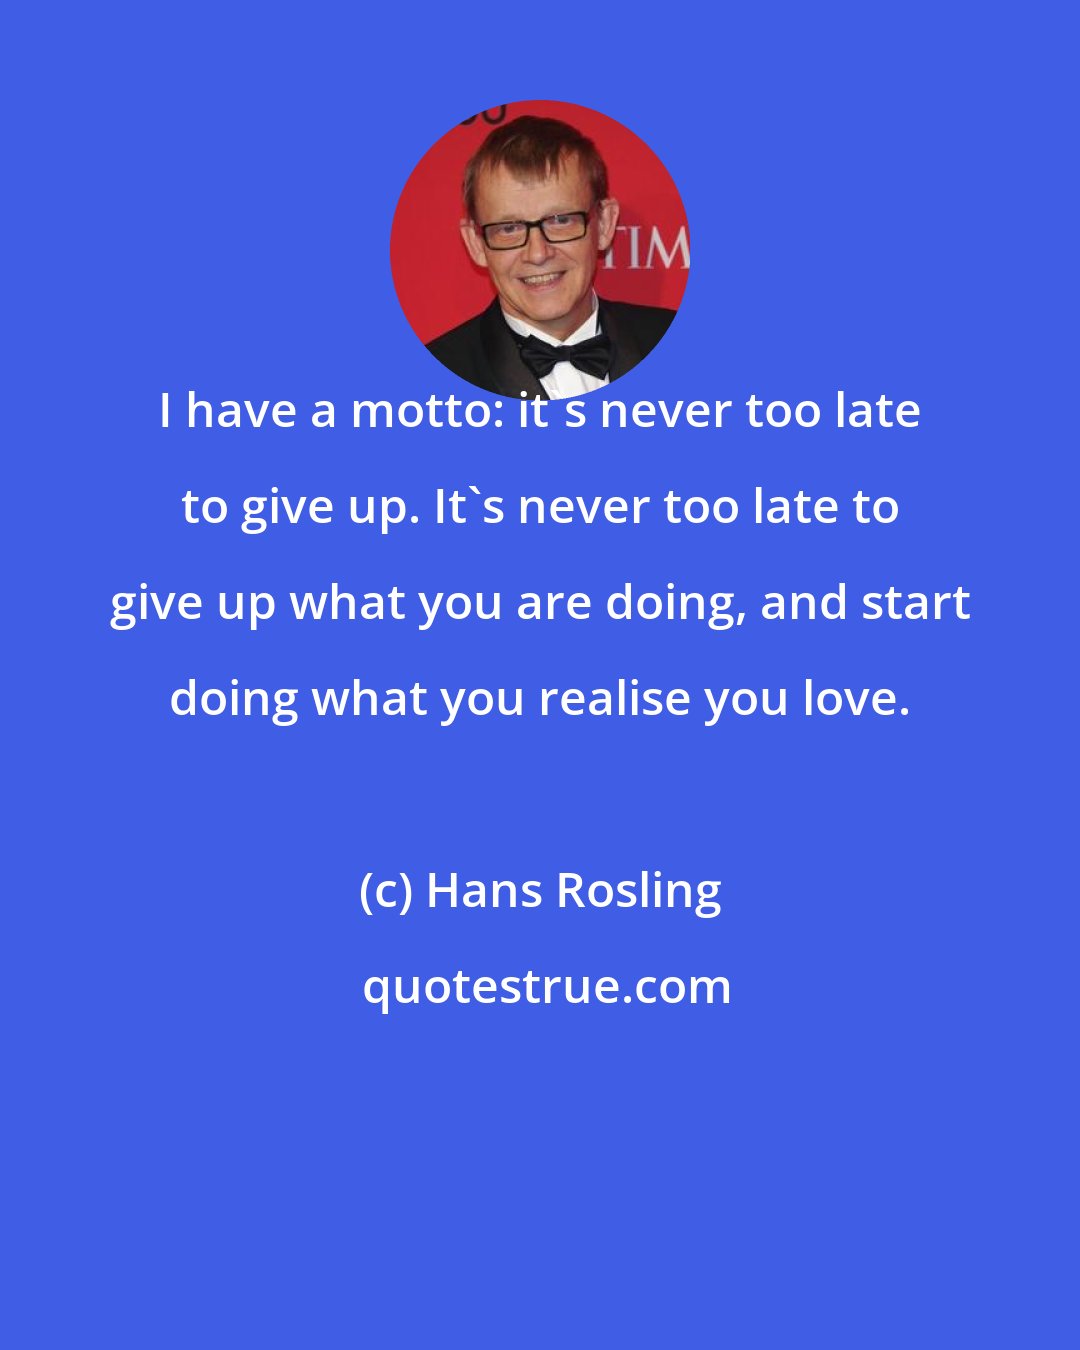 Hans Rosling: I have a motto: it's never too late to give up. It's never too late to give up what you are doing, and start doing what you realise you love.